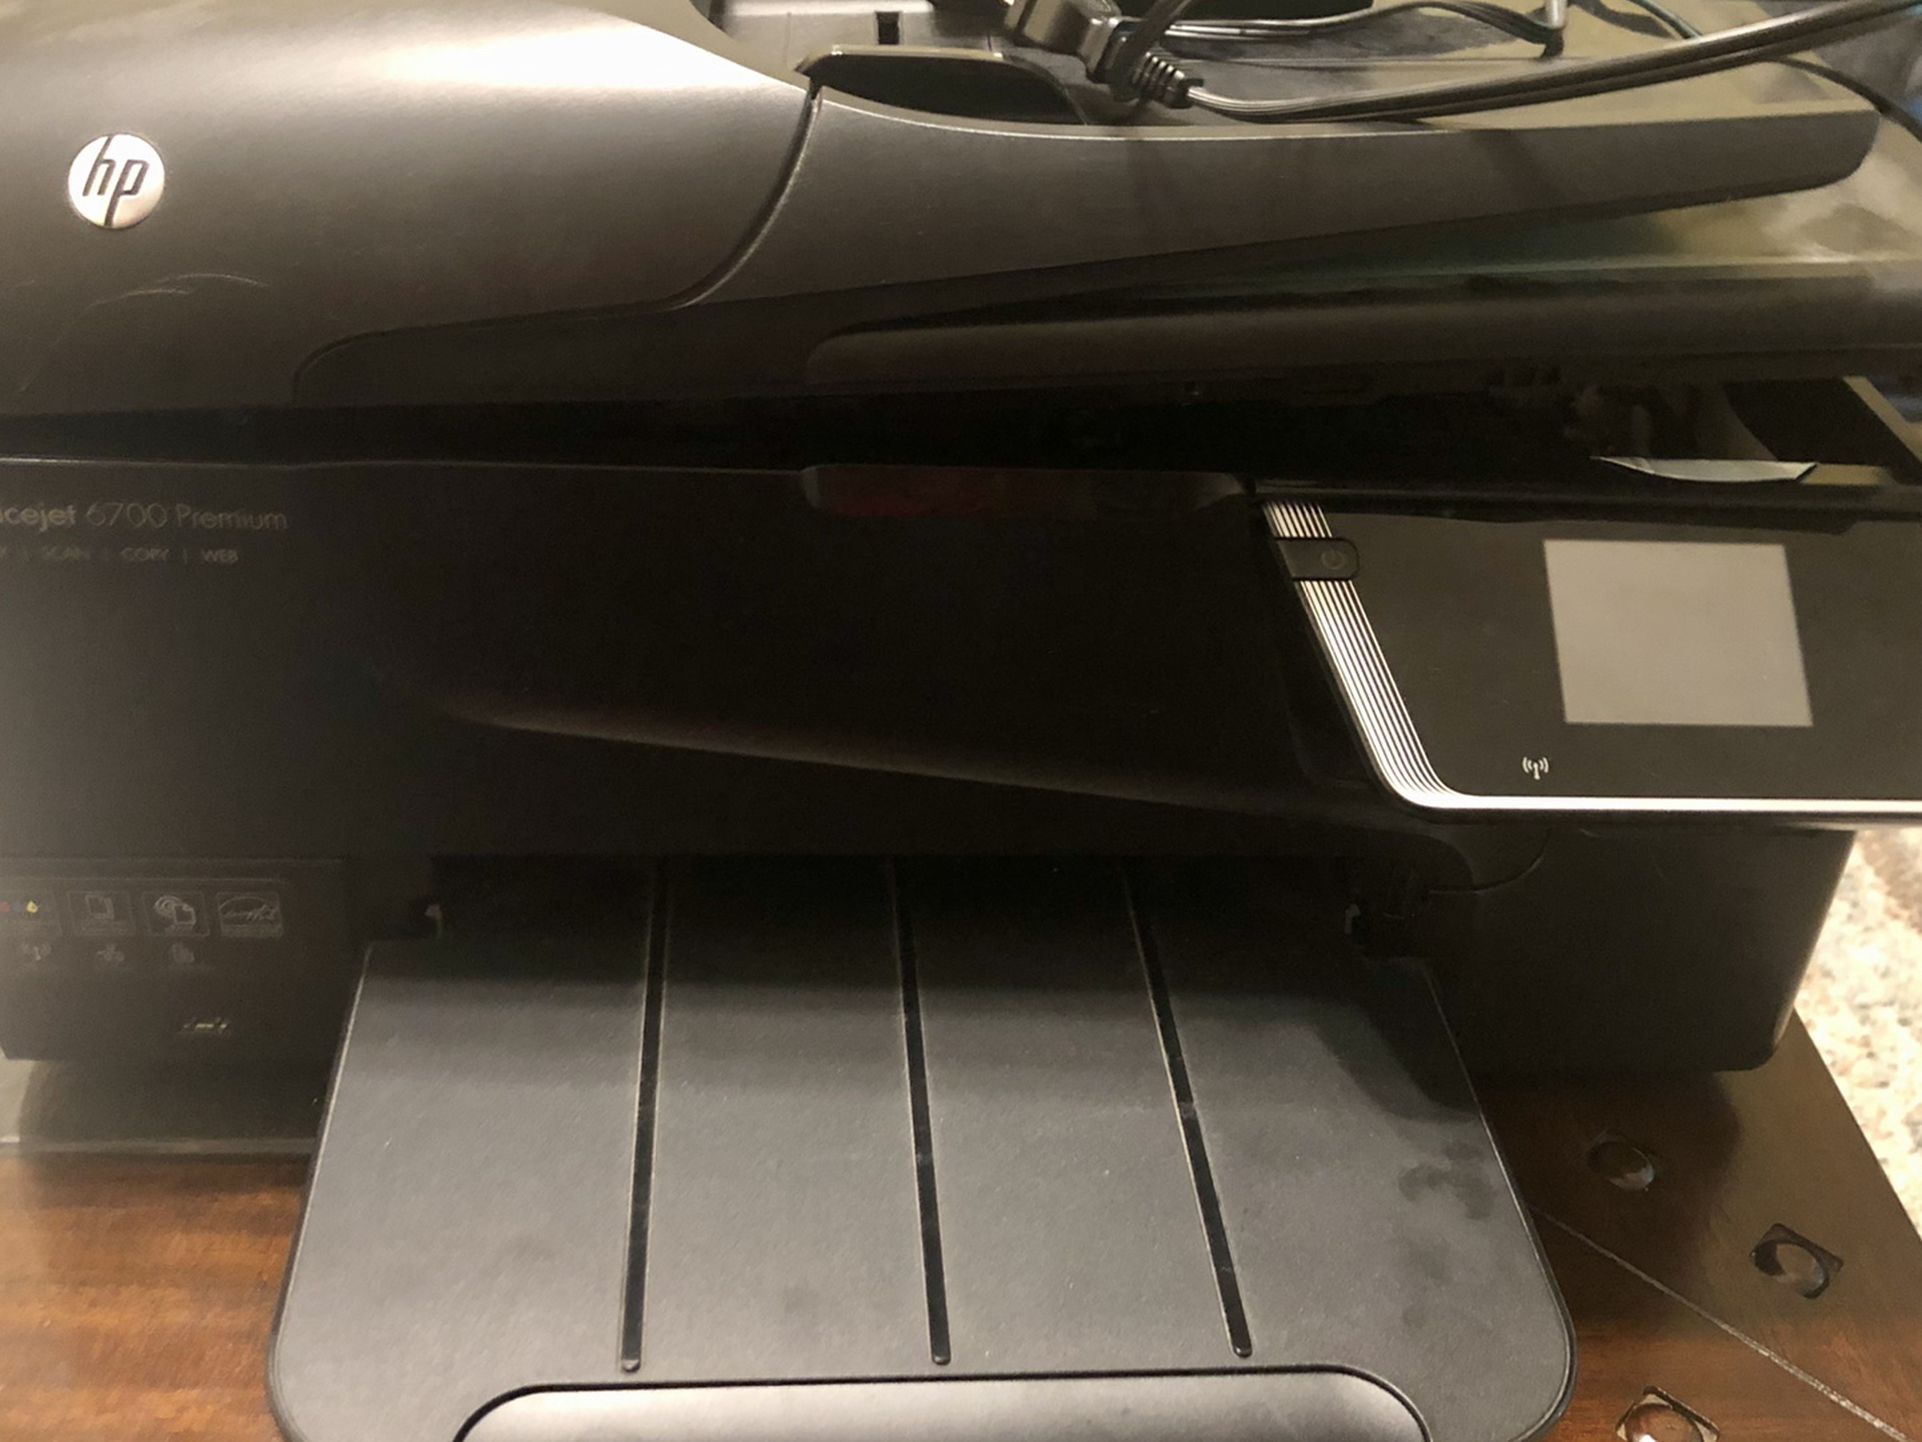 HP Officejet 6700 Premium- selling for parts